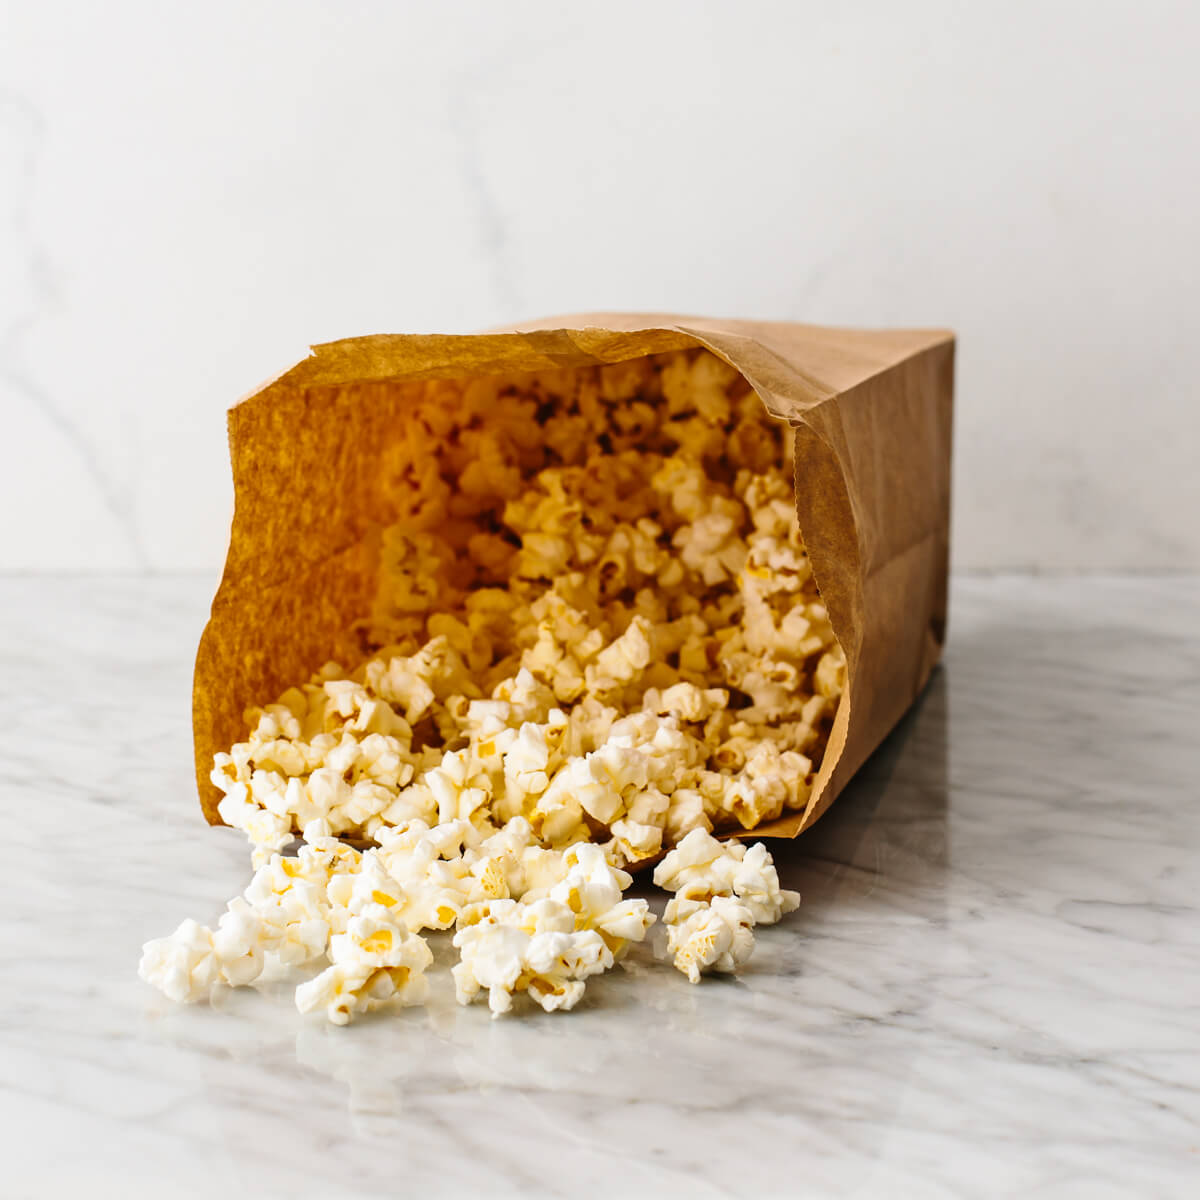 A bag with microwaved popcorn in it